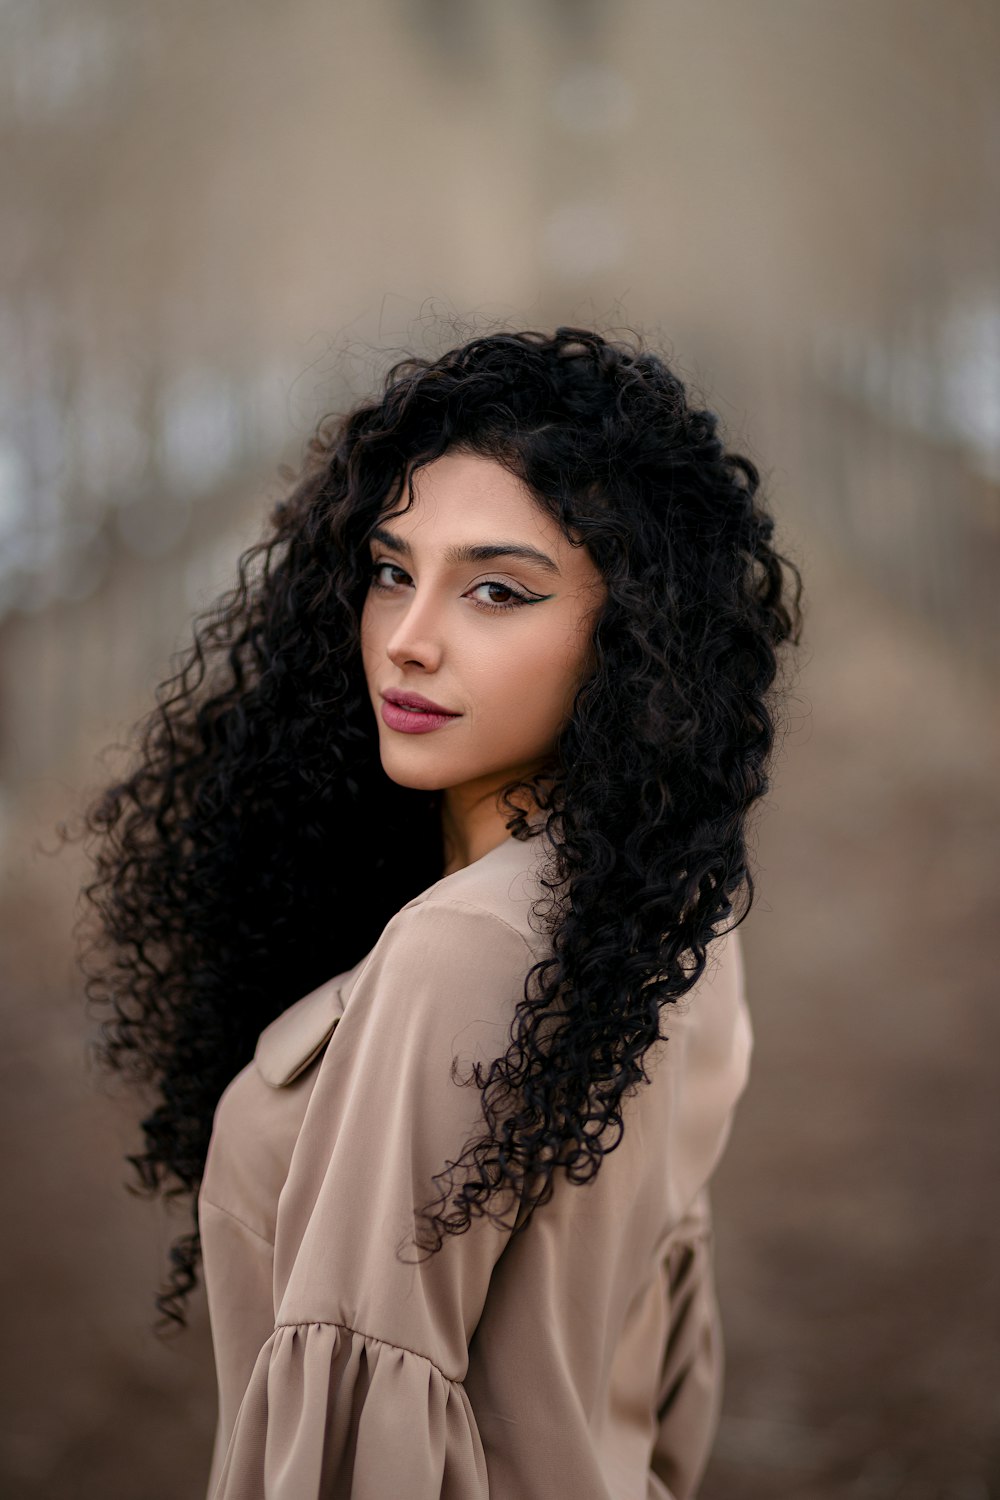 a woman with long black curly hair posing for a picture